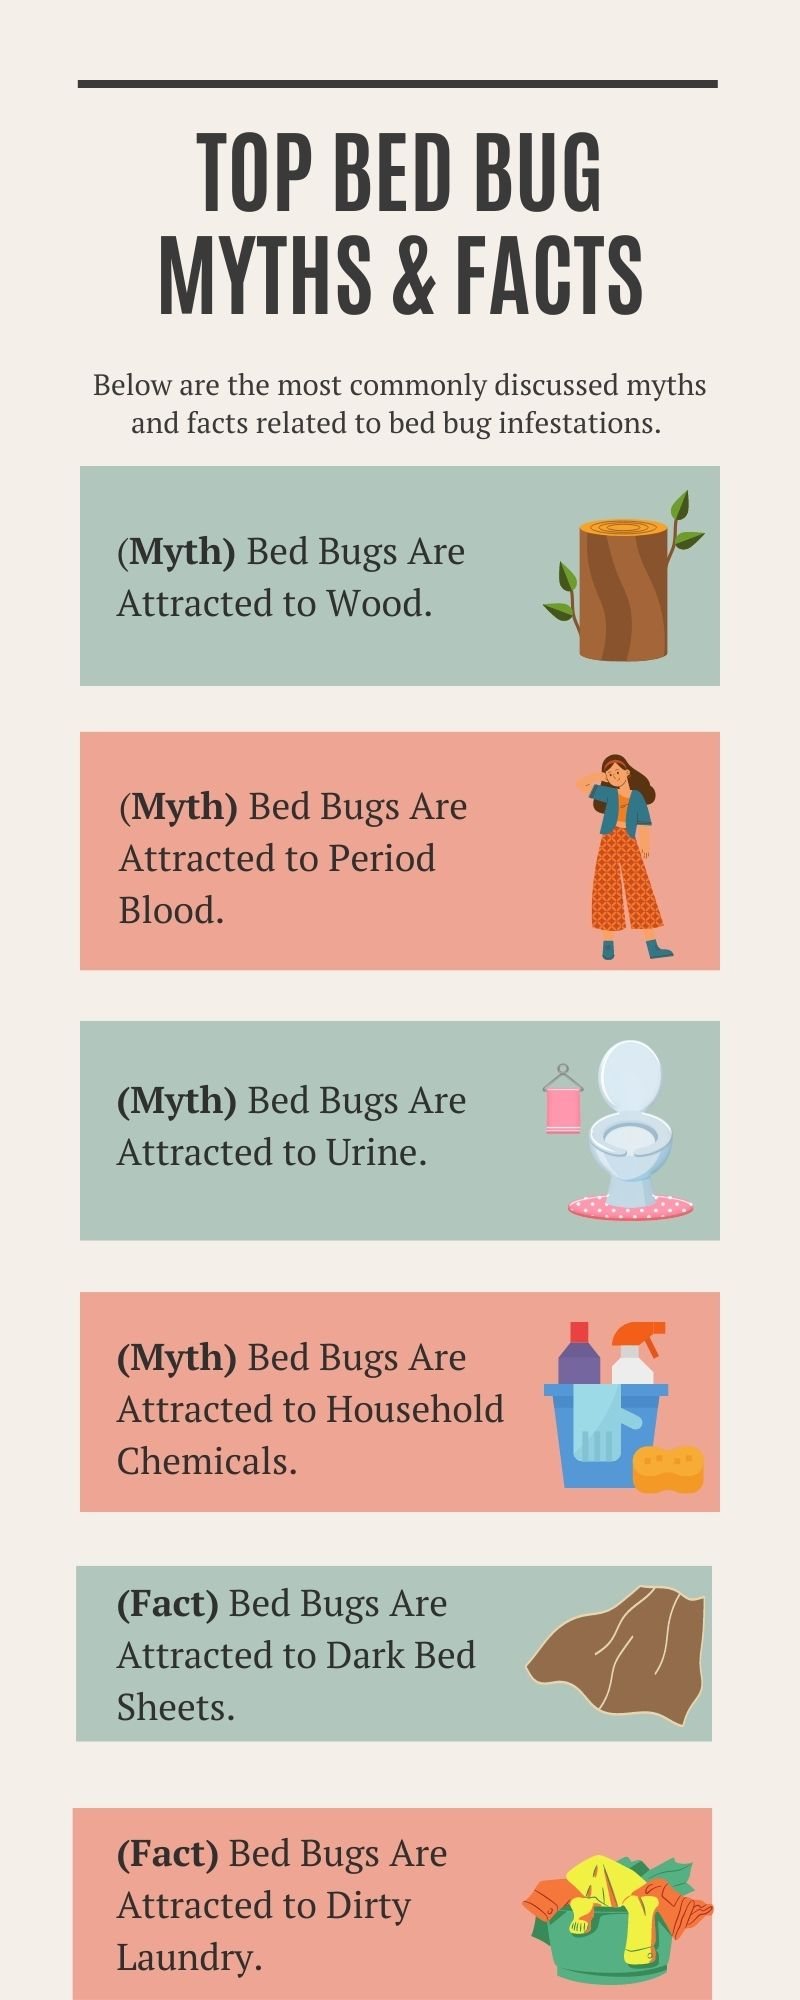 Top Bed Bug Myths or Facts